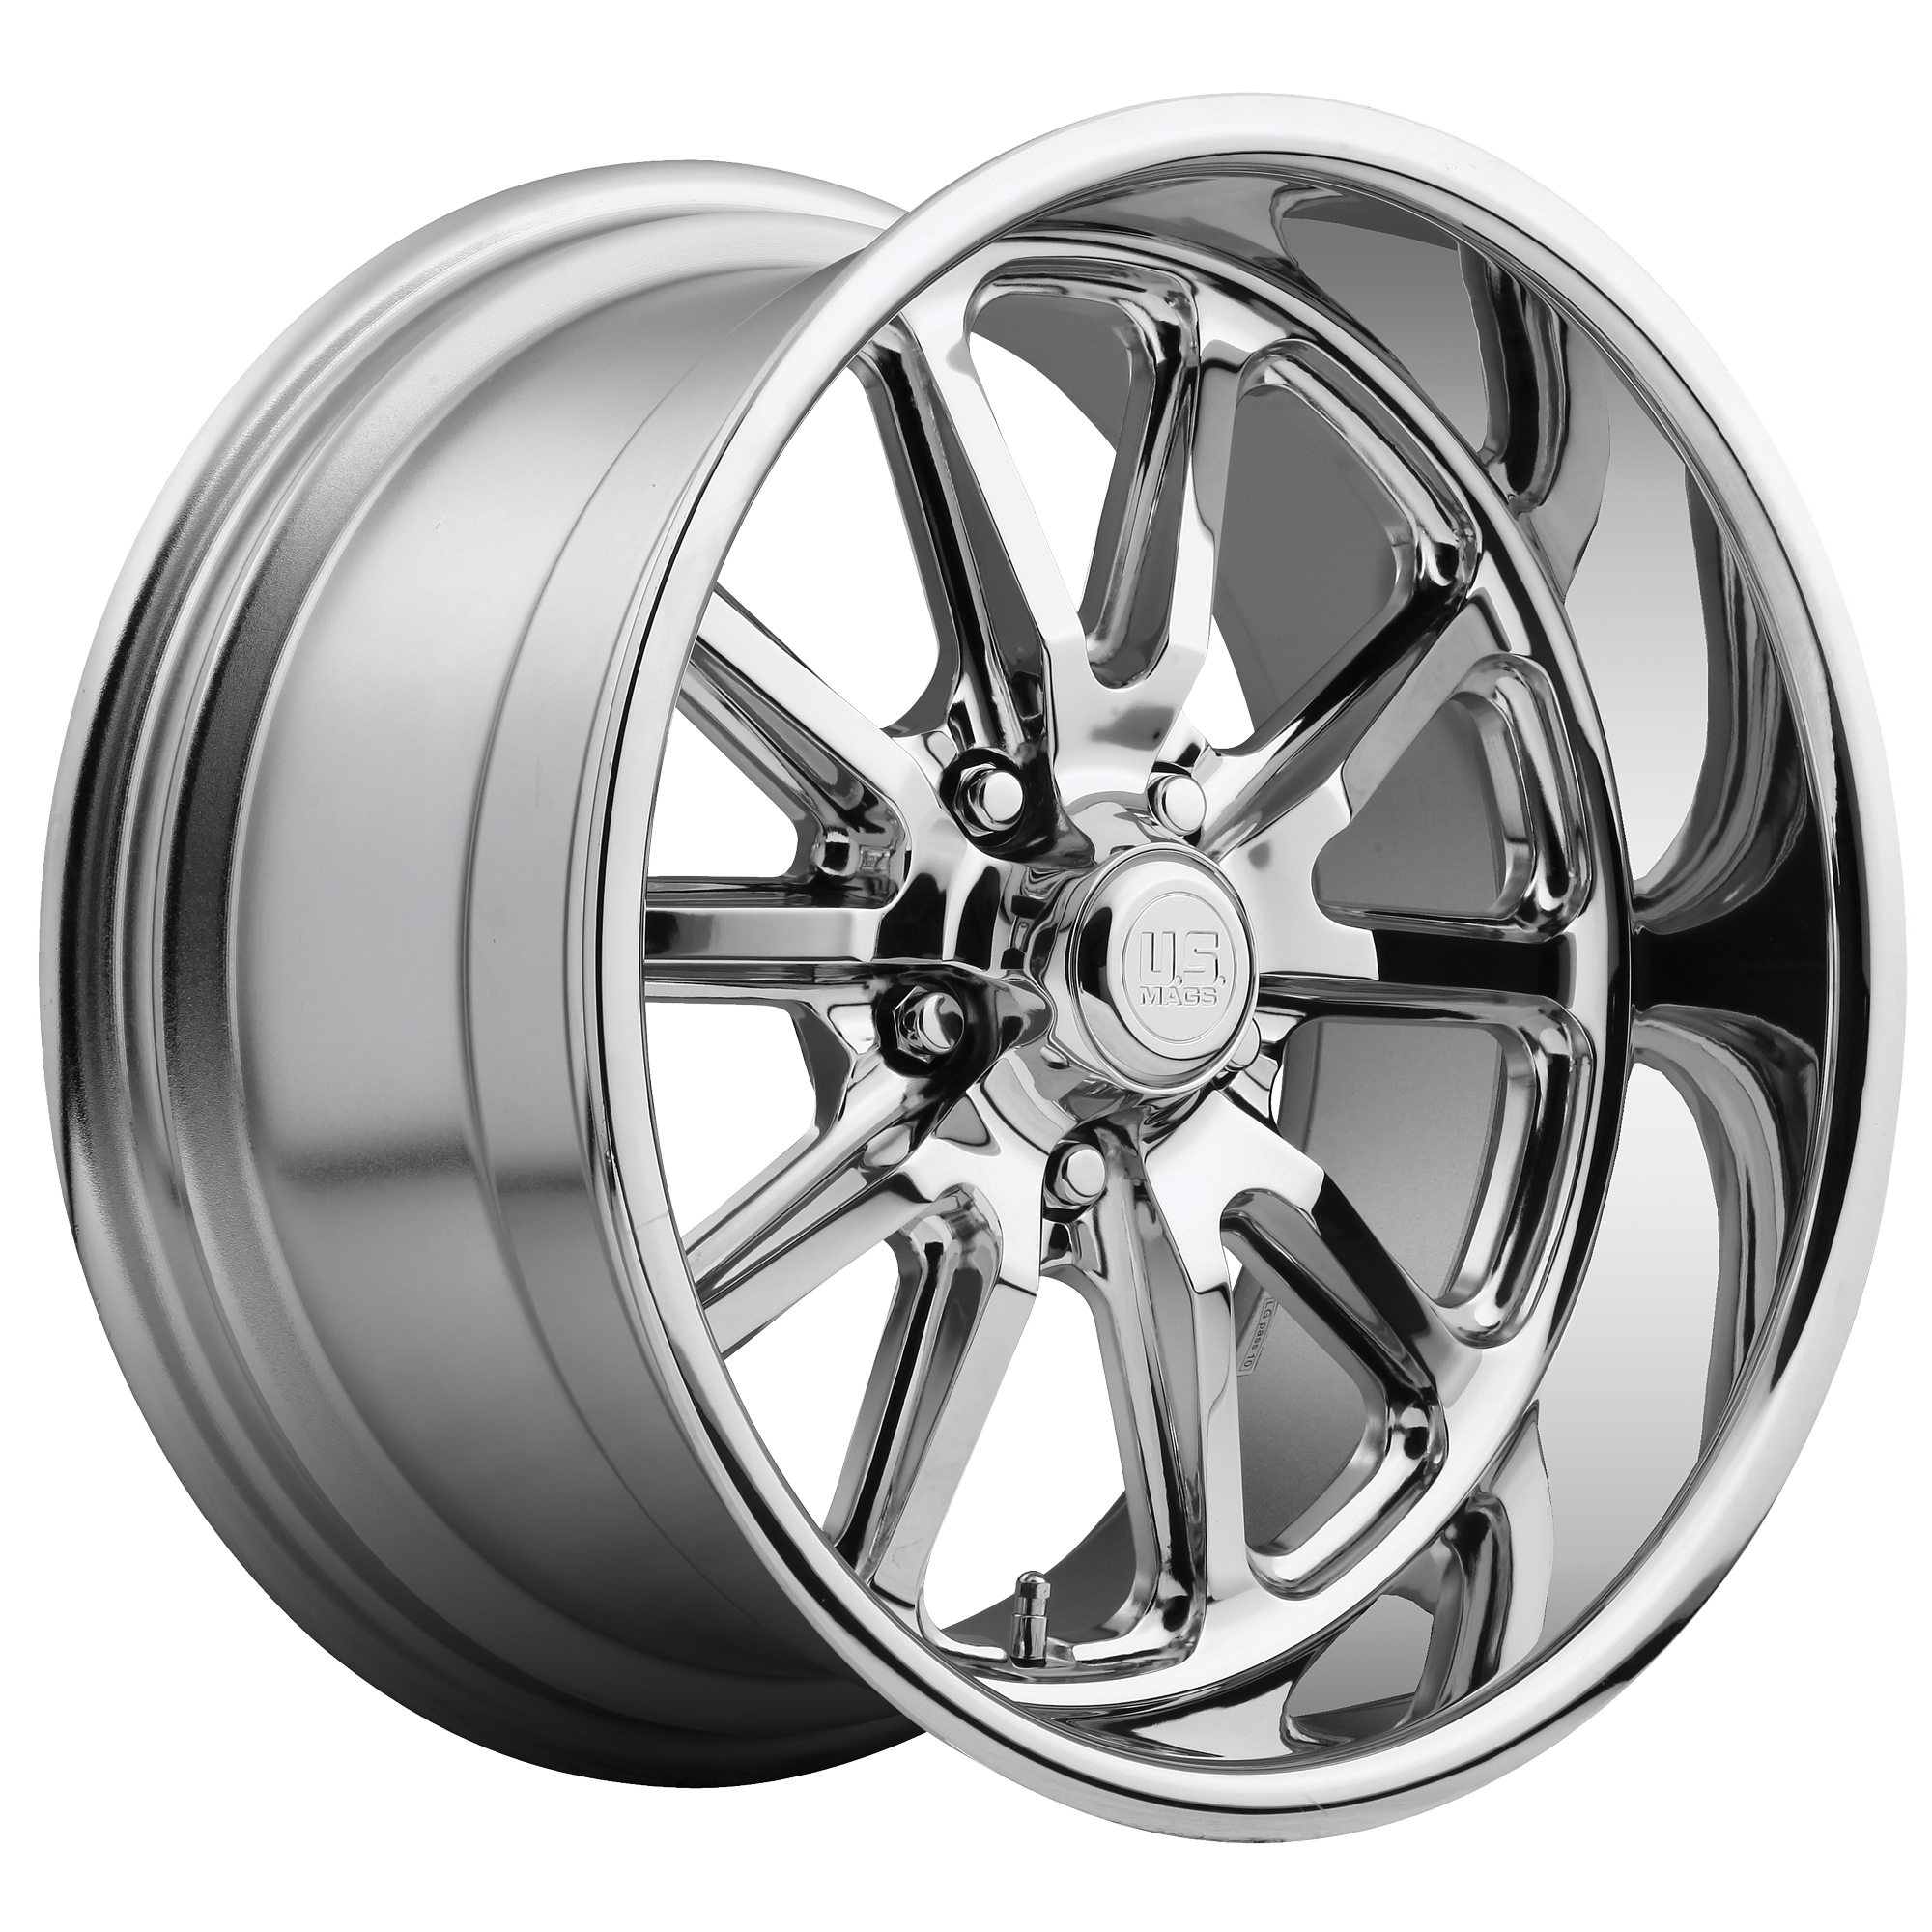 RAMBLER 17x8 5x114.30 CHROME PLATED (1 mm) - Tires and Engine Performance